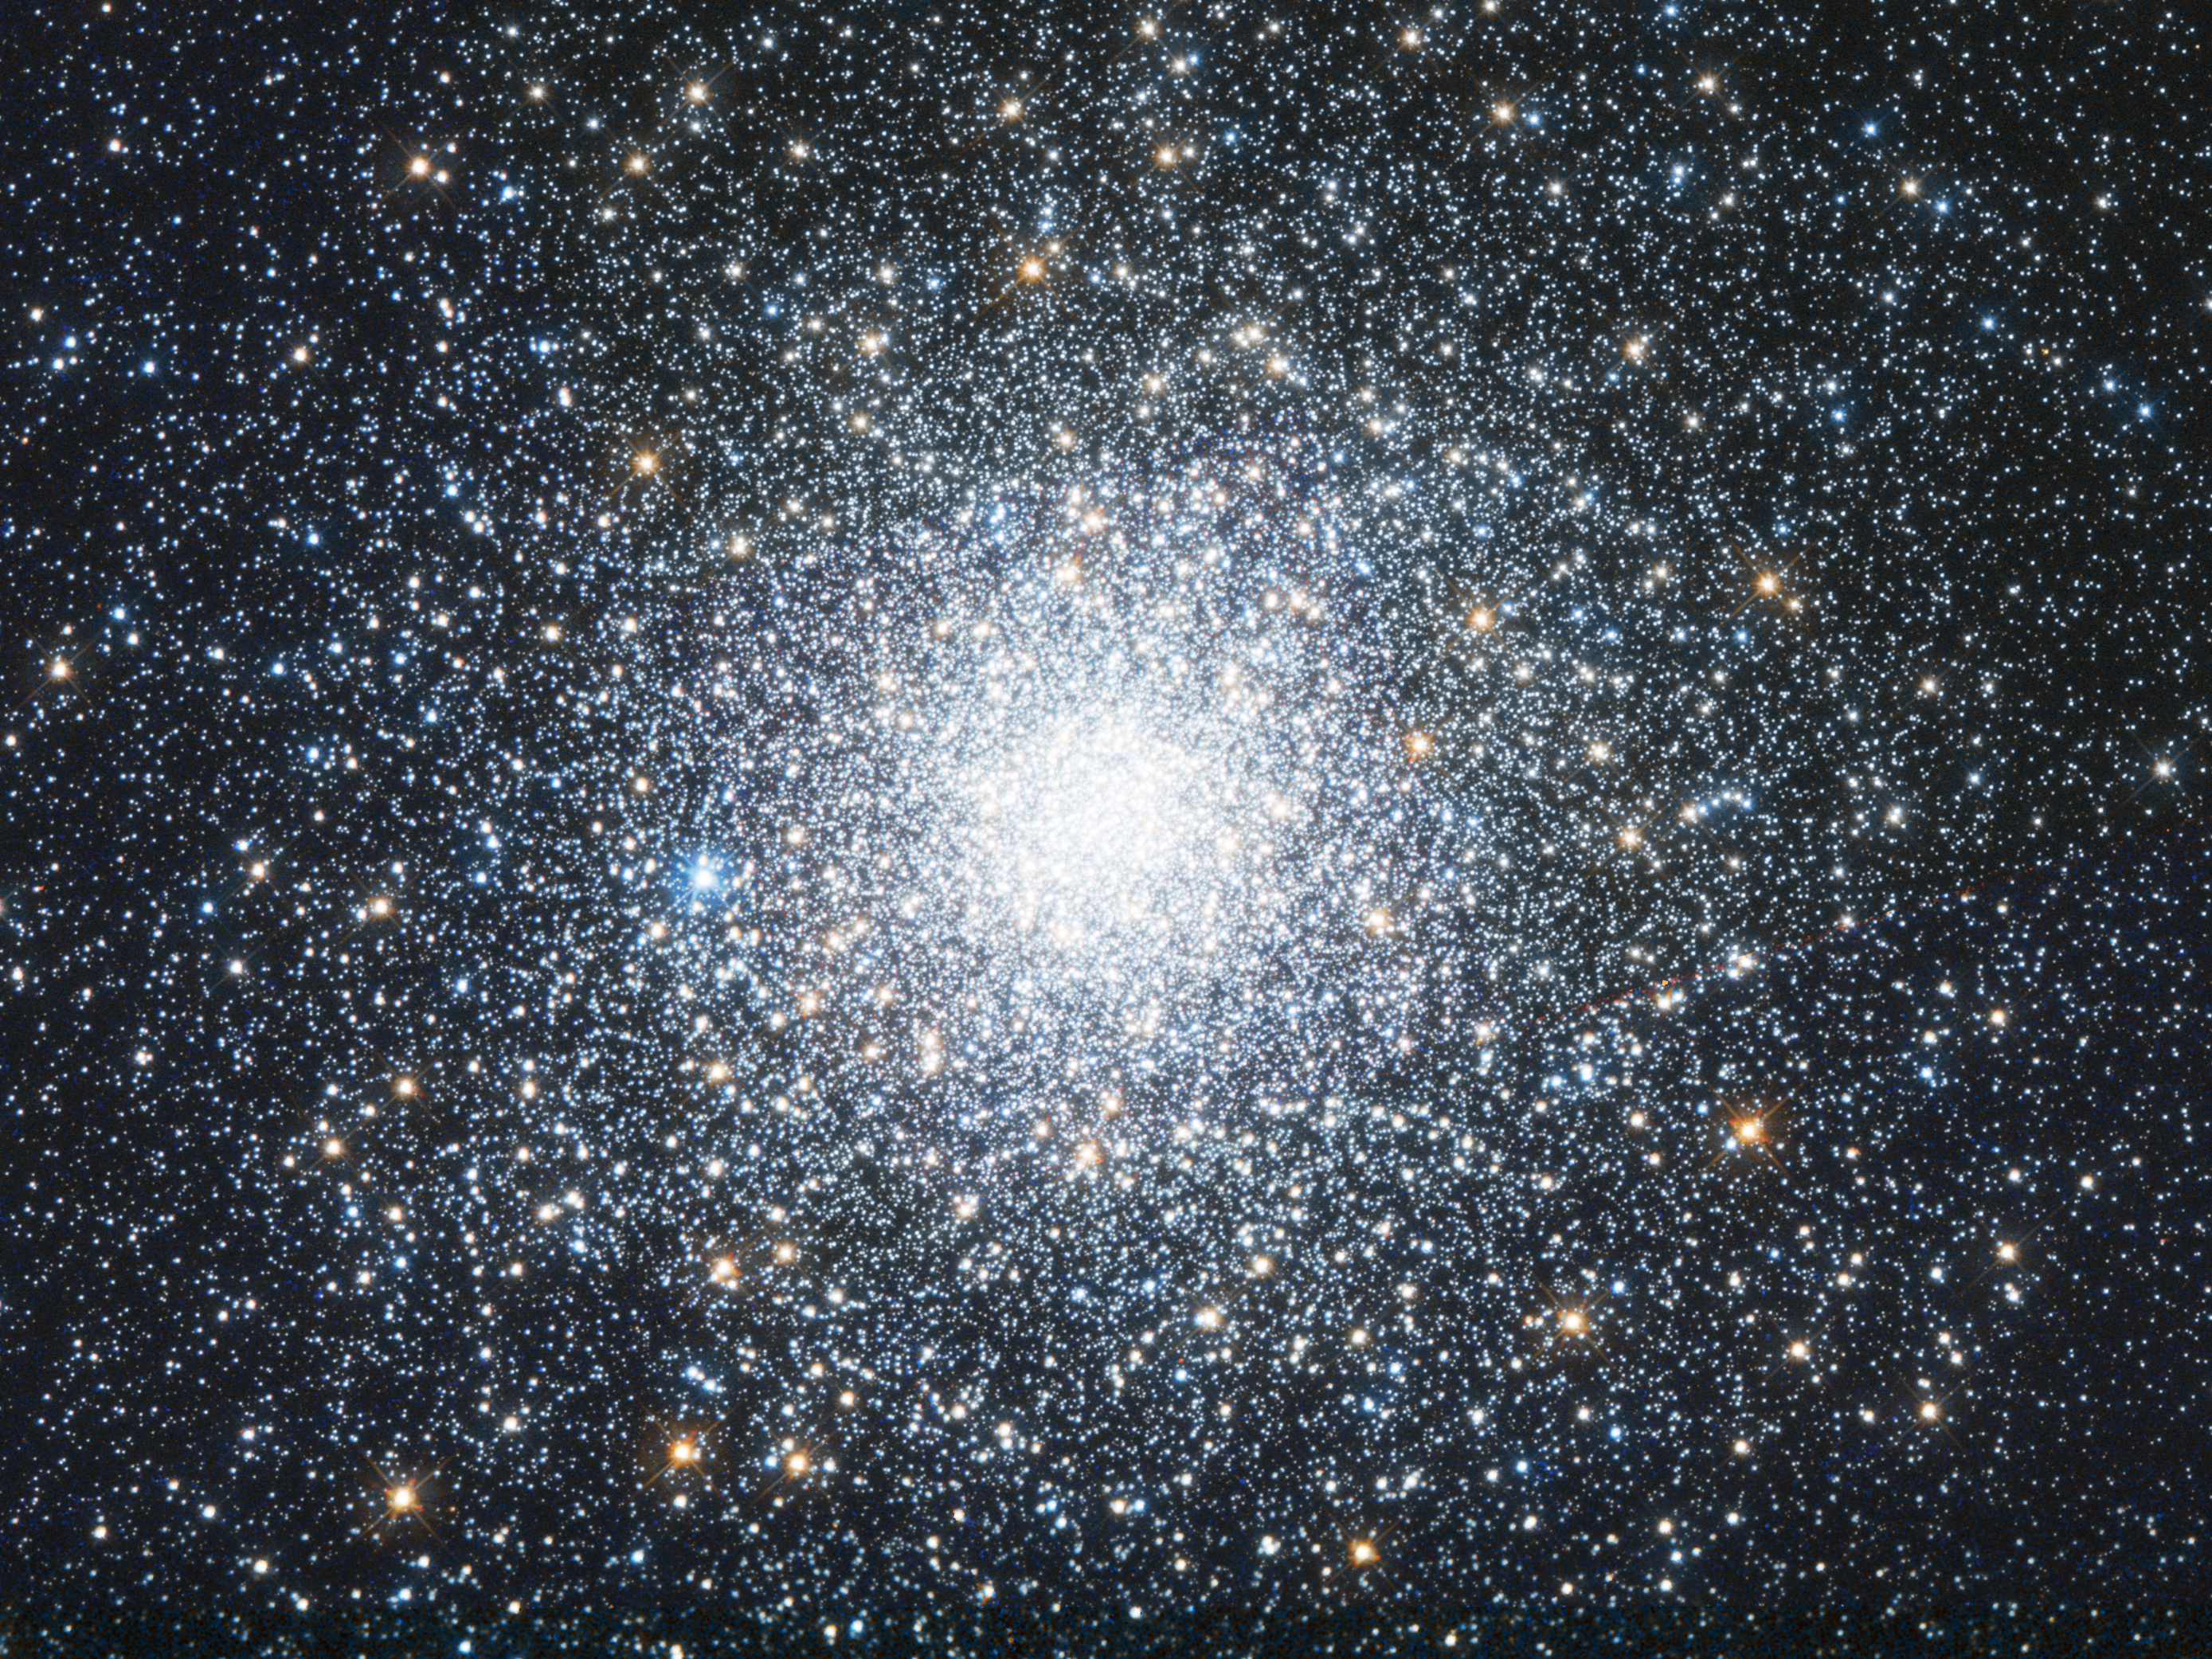 Large globular cluster of countless stars. The center is extremely bright and white due to the amount of stars.